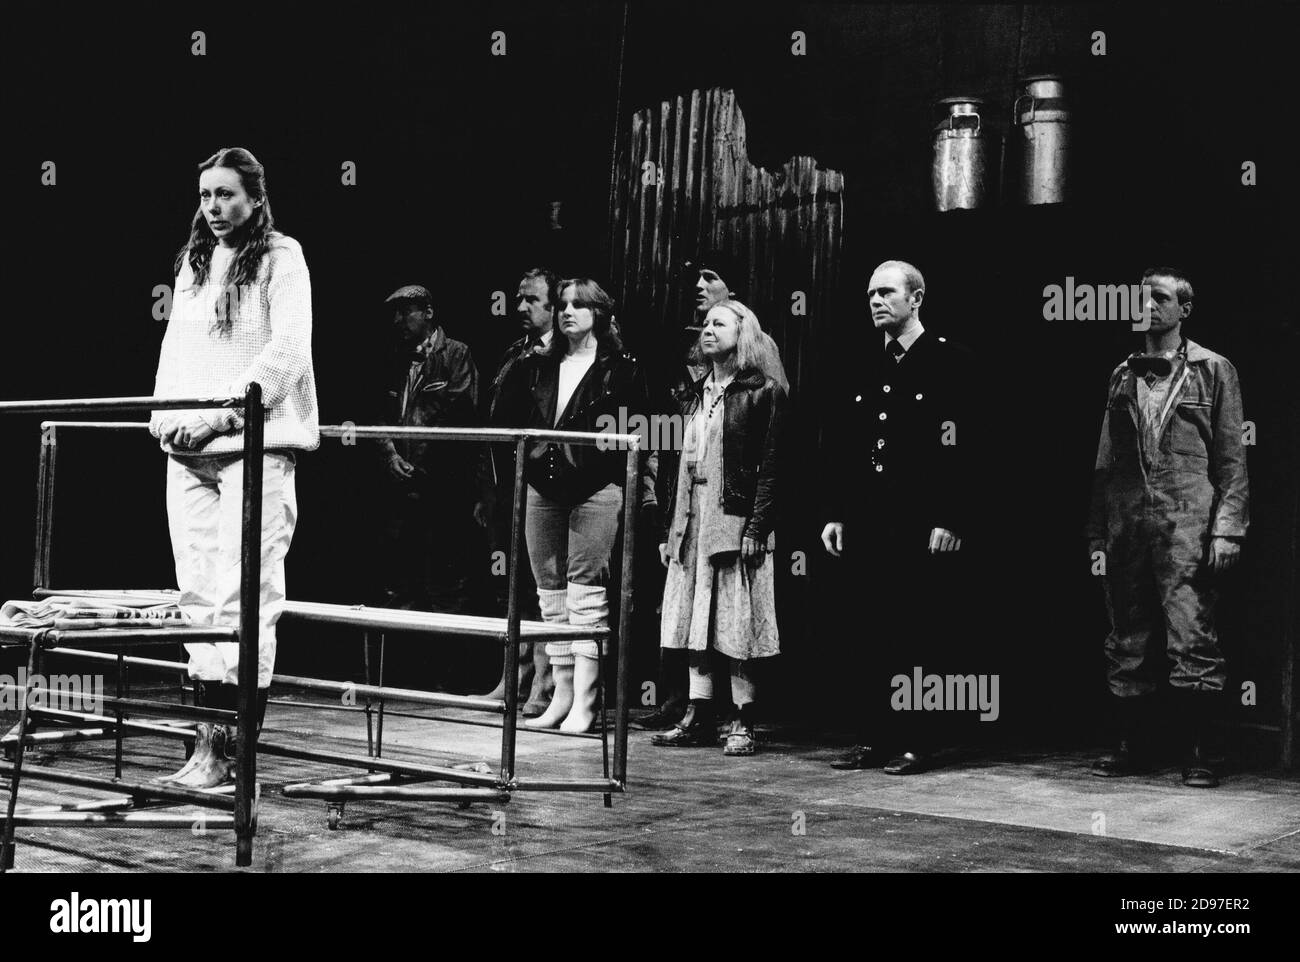 left: Jenny Agutter (Grace Gross)  centre, l-r: Lesley Sharp (Alice), Brenda Peters (Mrs May), David Shaw-Parker (Gilbert) in THE BODY by Nick Darke at the Royal Shakespeare Company (RSC), The Pit, Barbican Centre, London EC2  29/04/1983  design: Dermot Hayes  lighting: Michael Calf  director: Nick Hamm Stock Photo